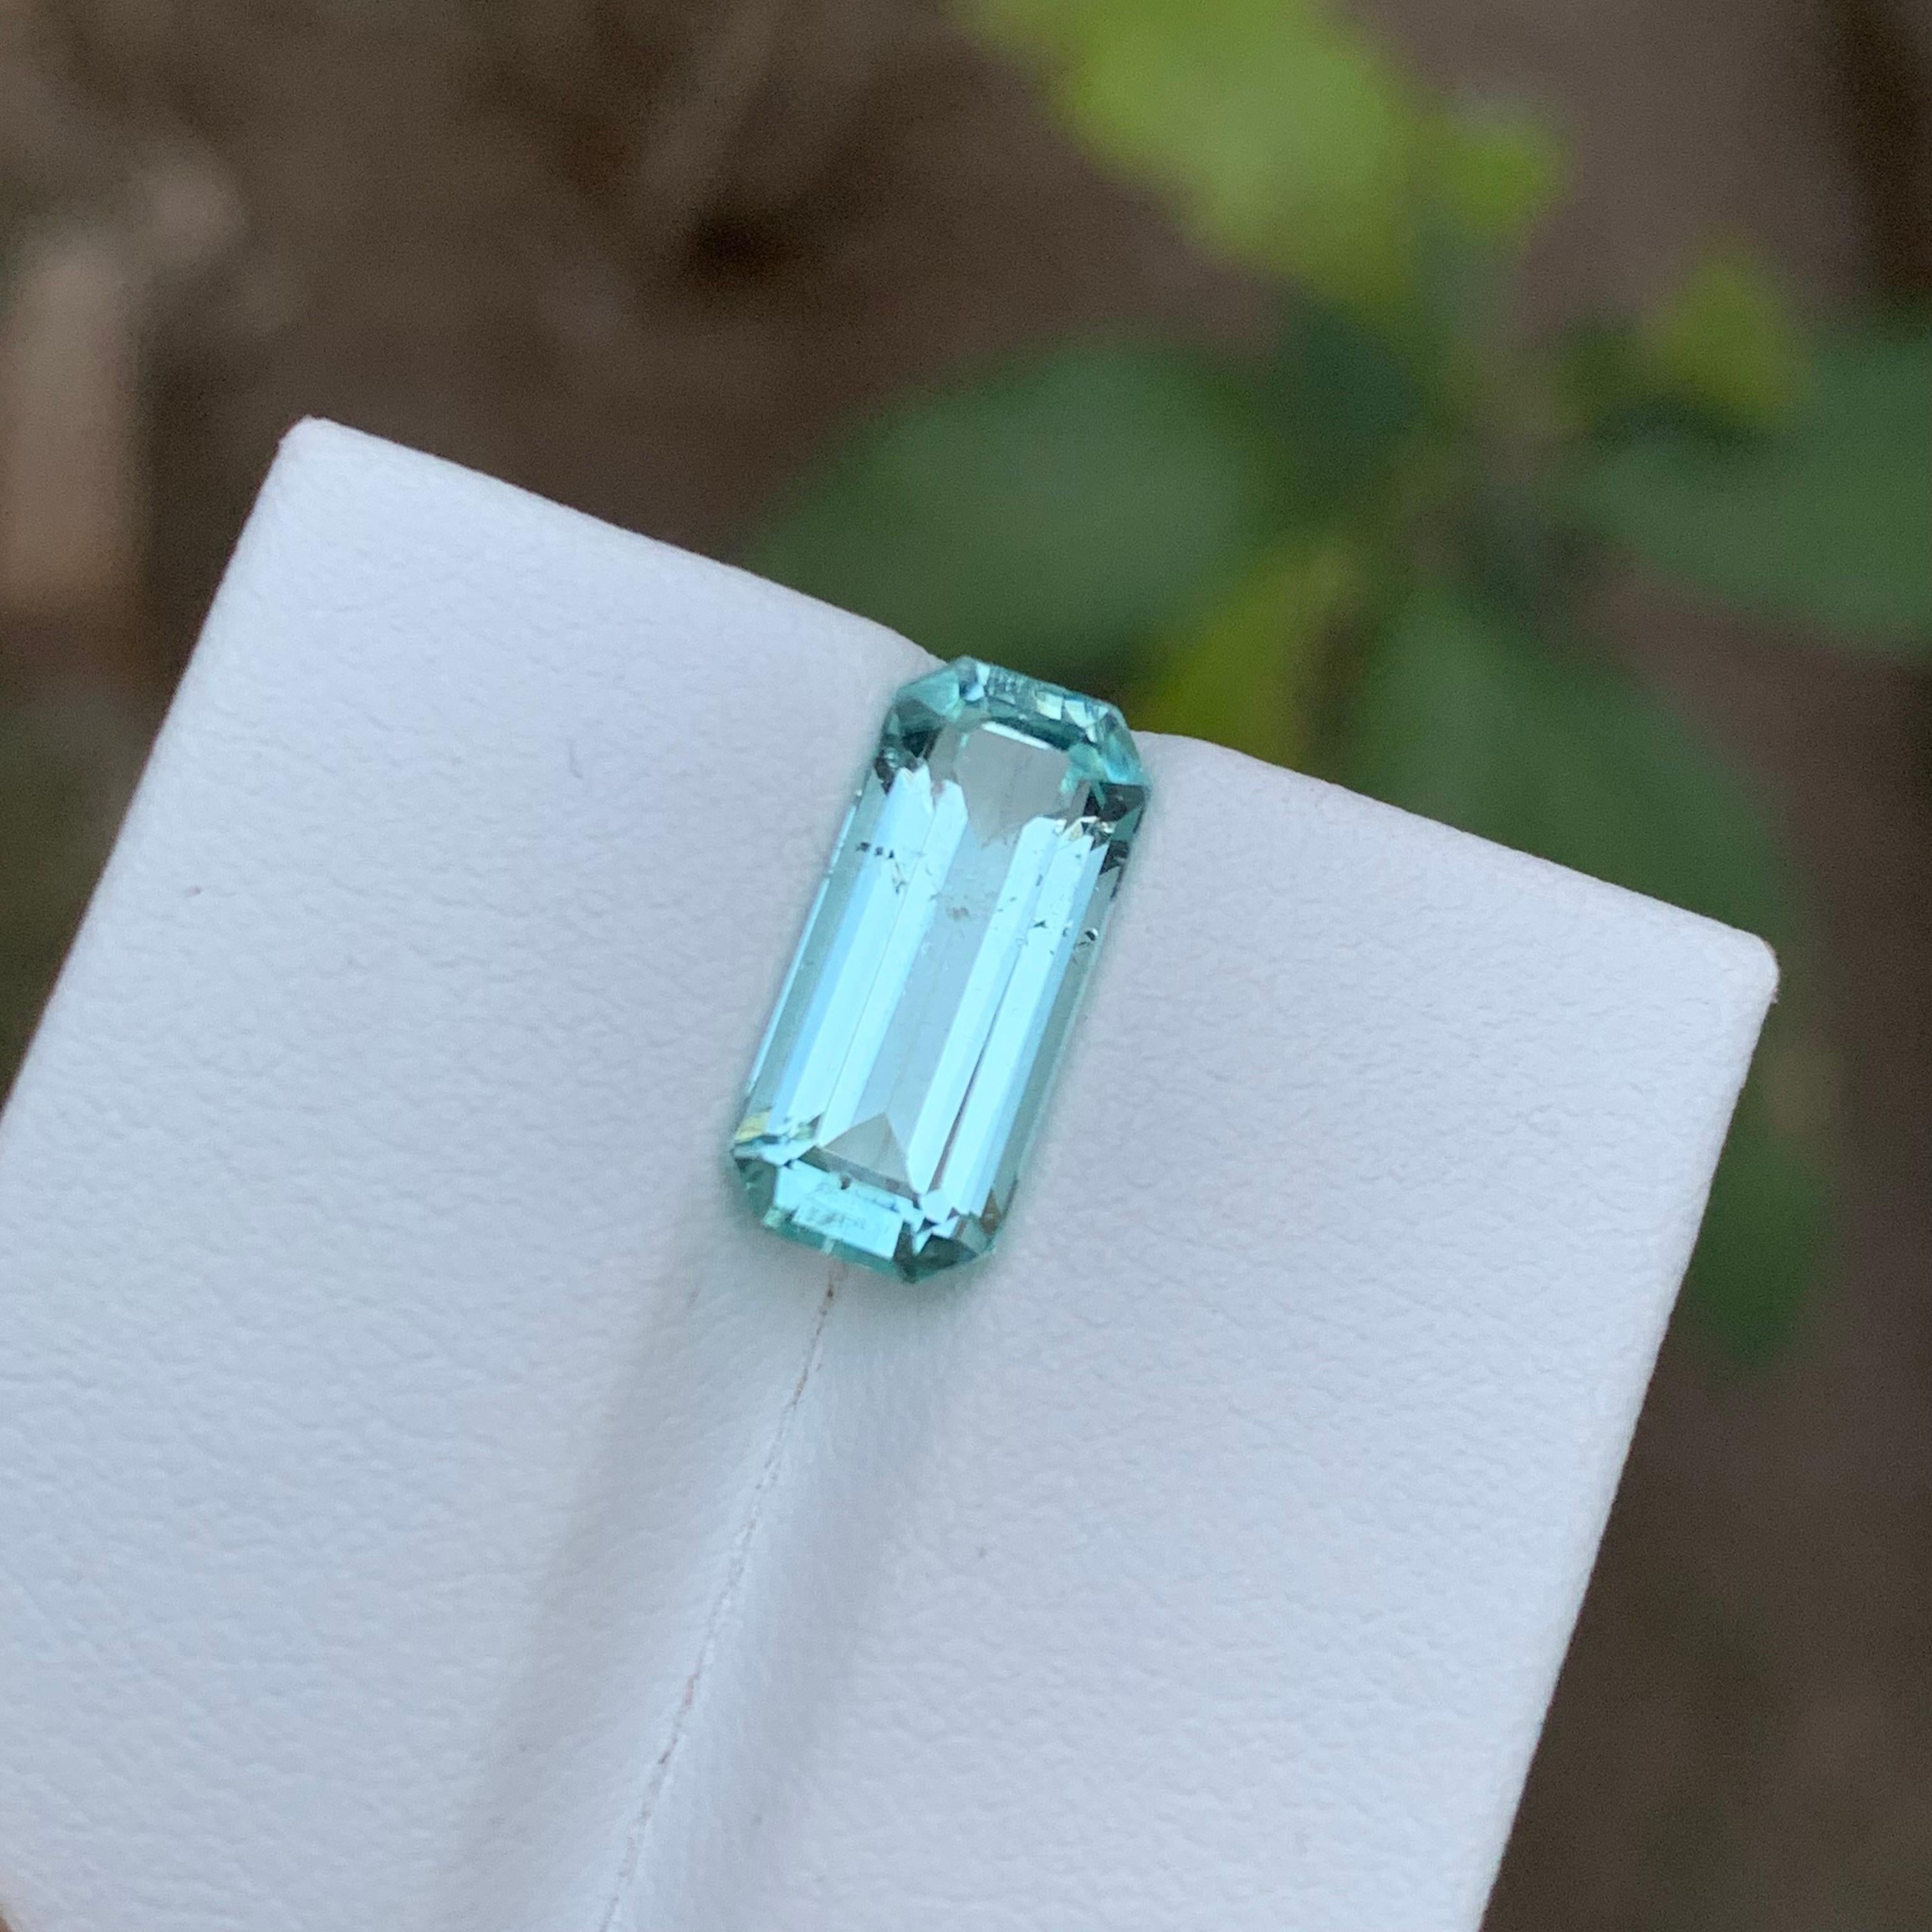 Contemporary Rare Seafoam Natural Tourmaline Gemstone, 3.65 Ct Emerald Cut for Ring/Jewelry For Sale